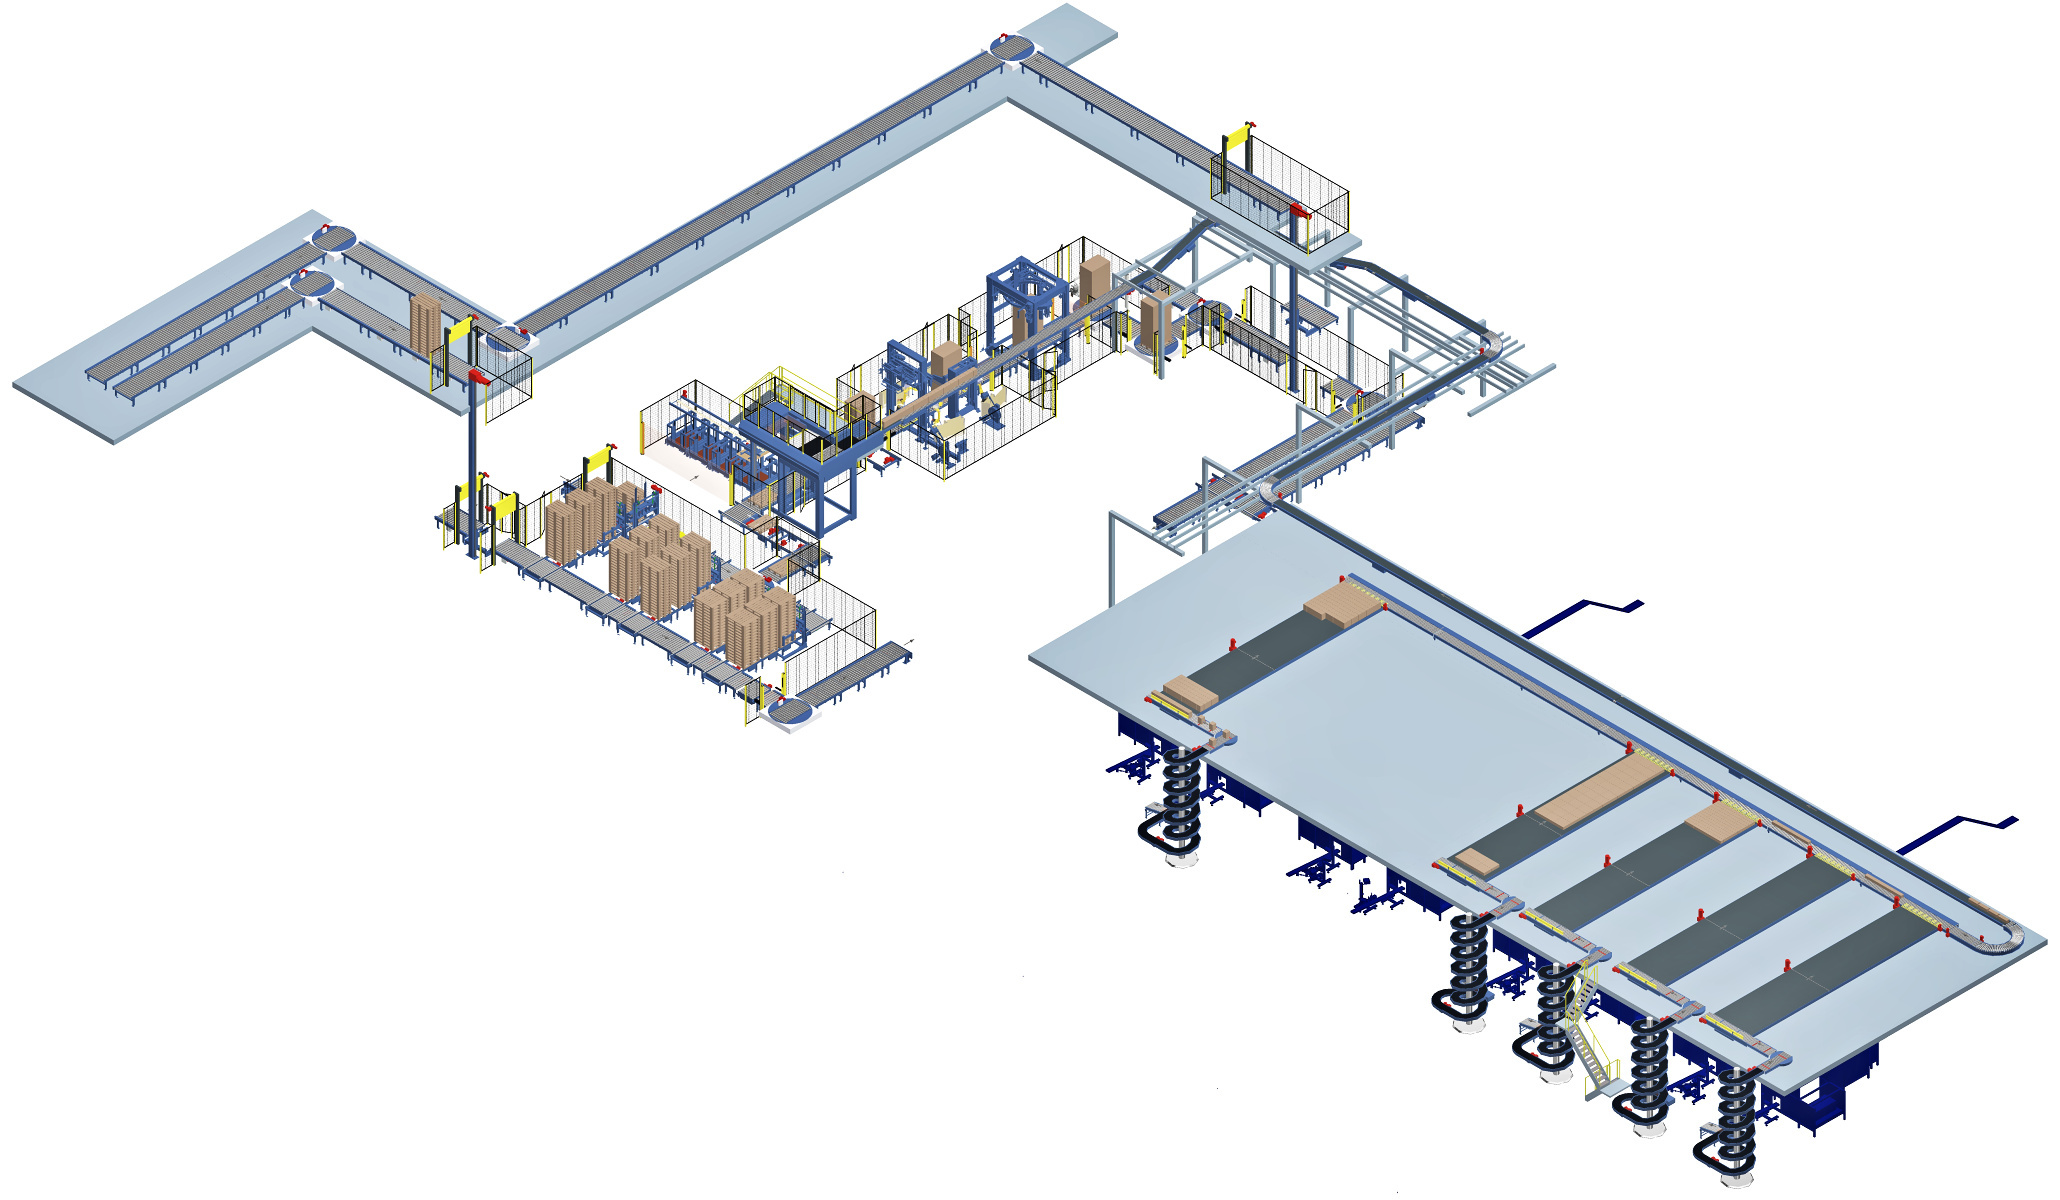 The project 3D layout showing the existing four packing lines and buffer tables plus one future line extension